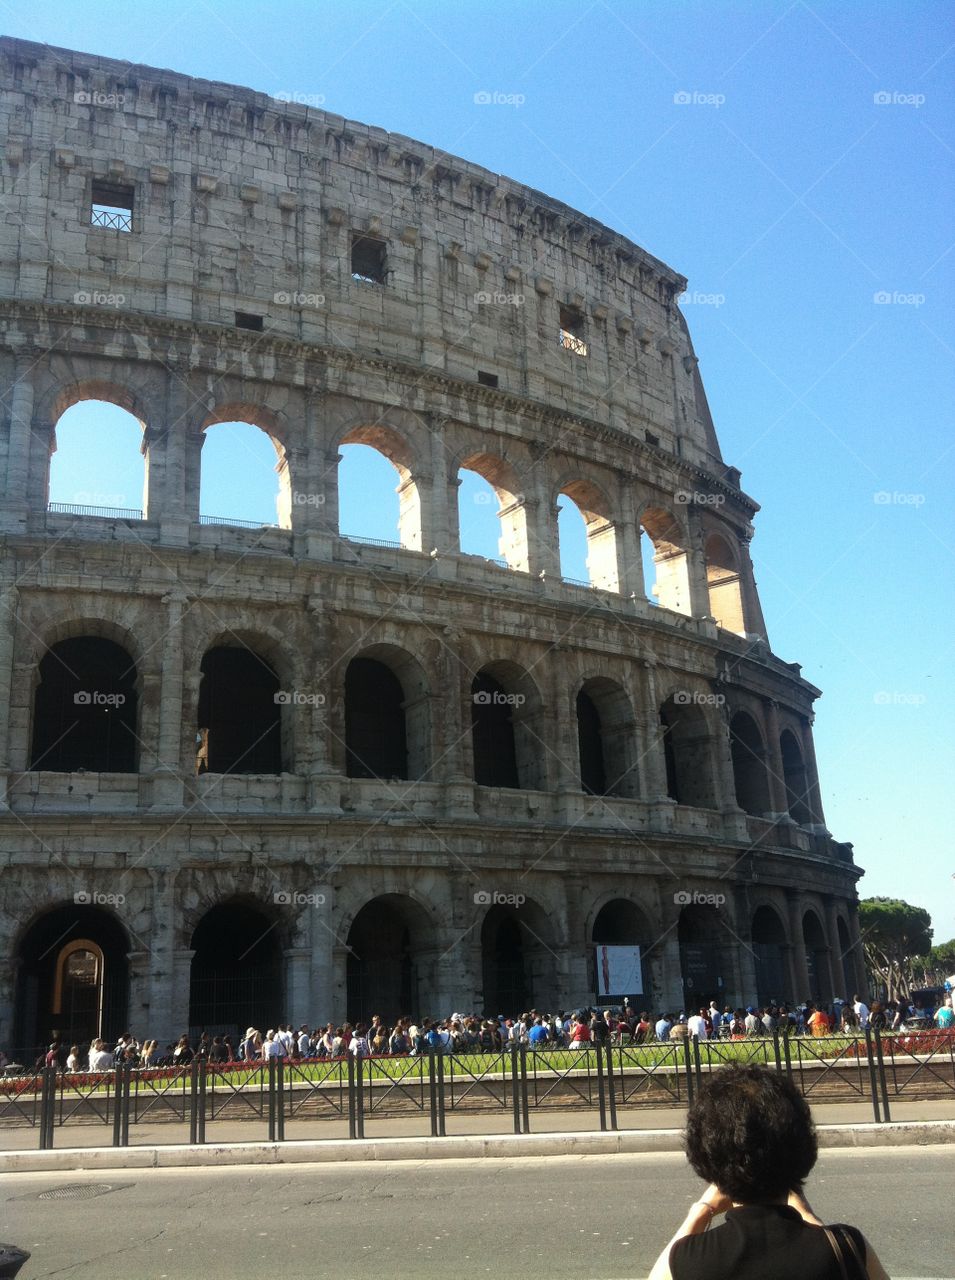 Coliseum . Vacation in Italy